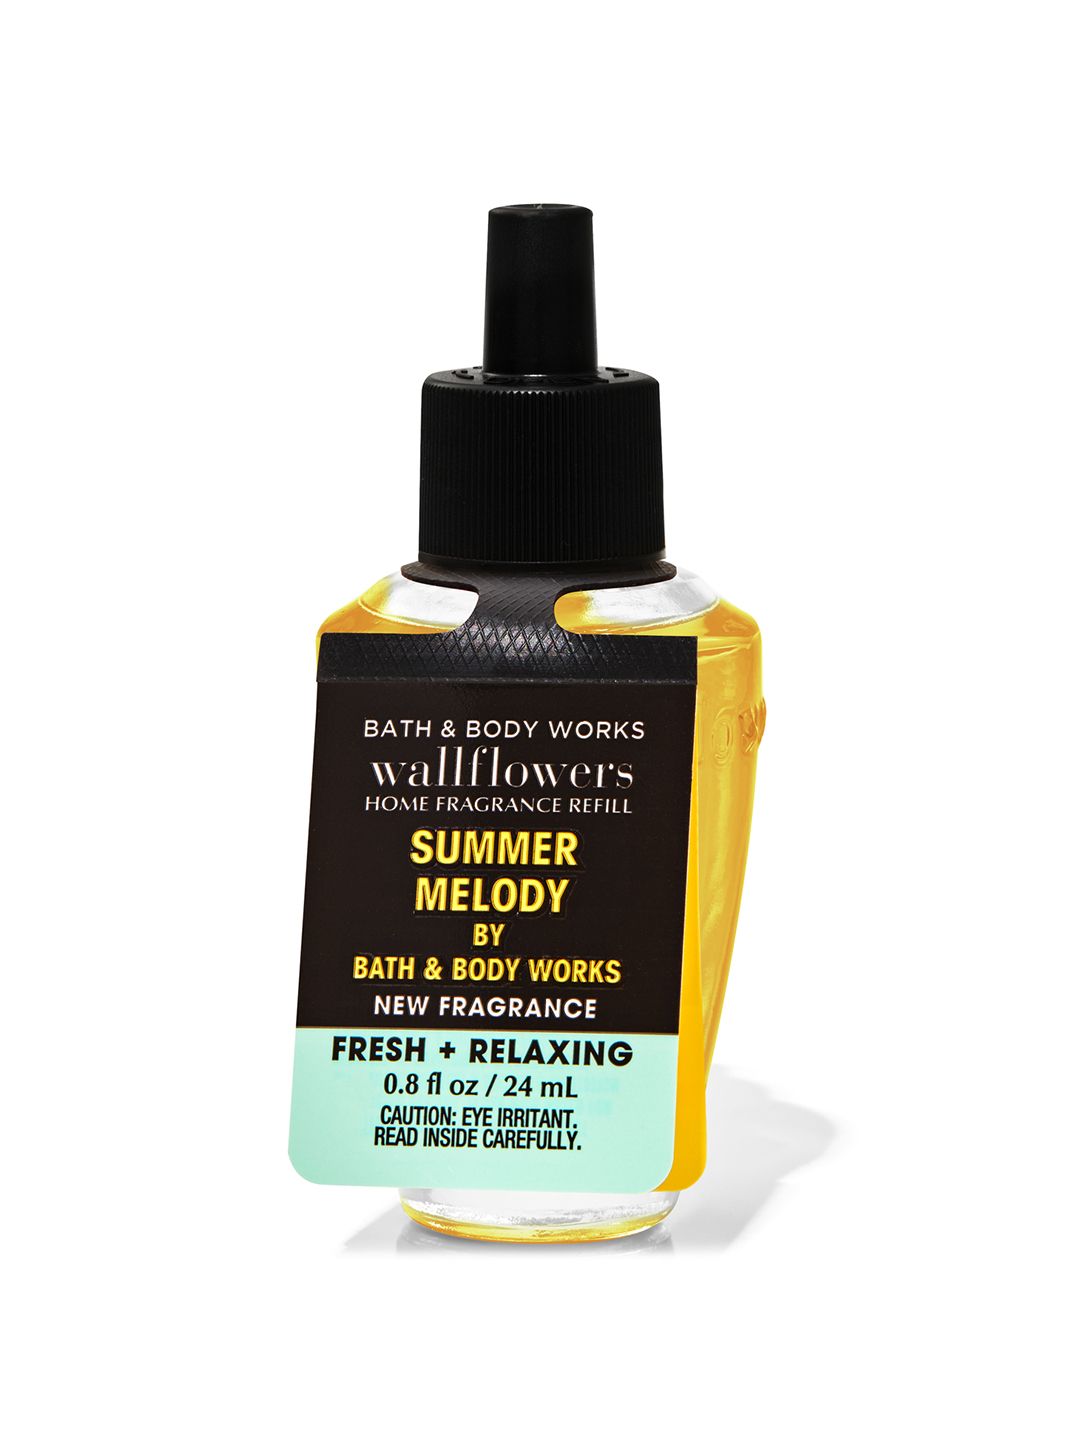 Bath & Body Works Summer Melody Wallflowers Home Fragrance Refill - Fresh & Relaxing- 24ml Price in India